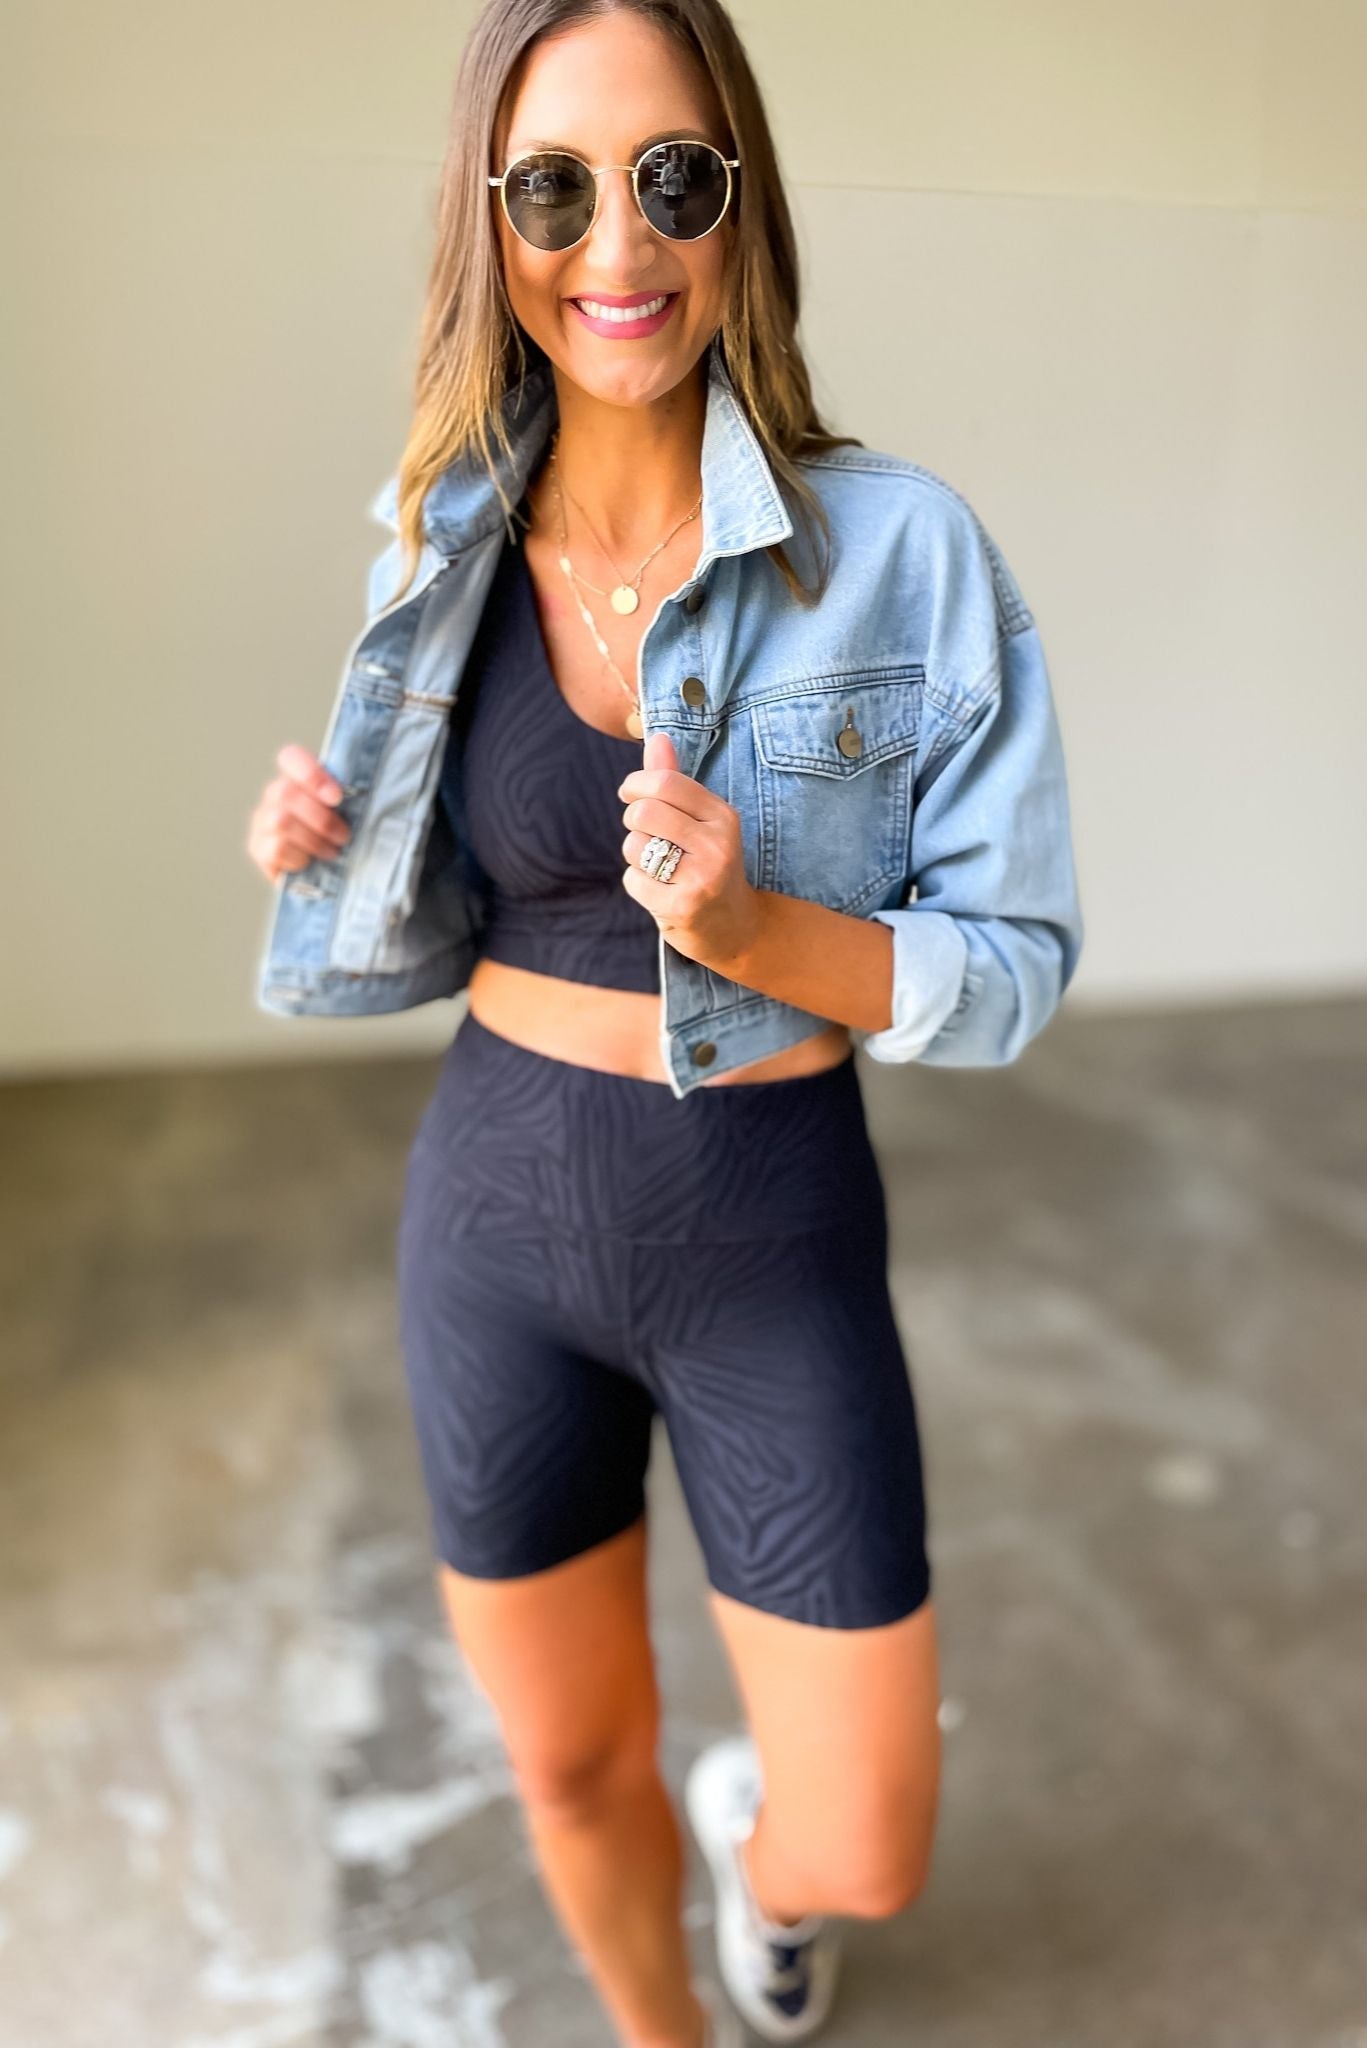 Load image into Gallery viewer, black animal print high waisted biker shorts, July athleisure collection, fitness fashion, gym style, shop style your senses by mallory fitzsimmons
